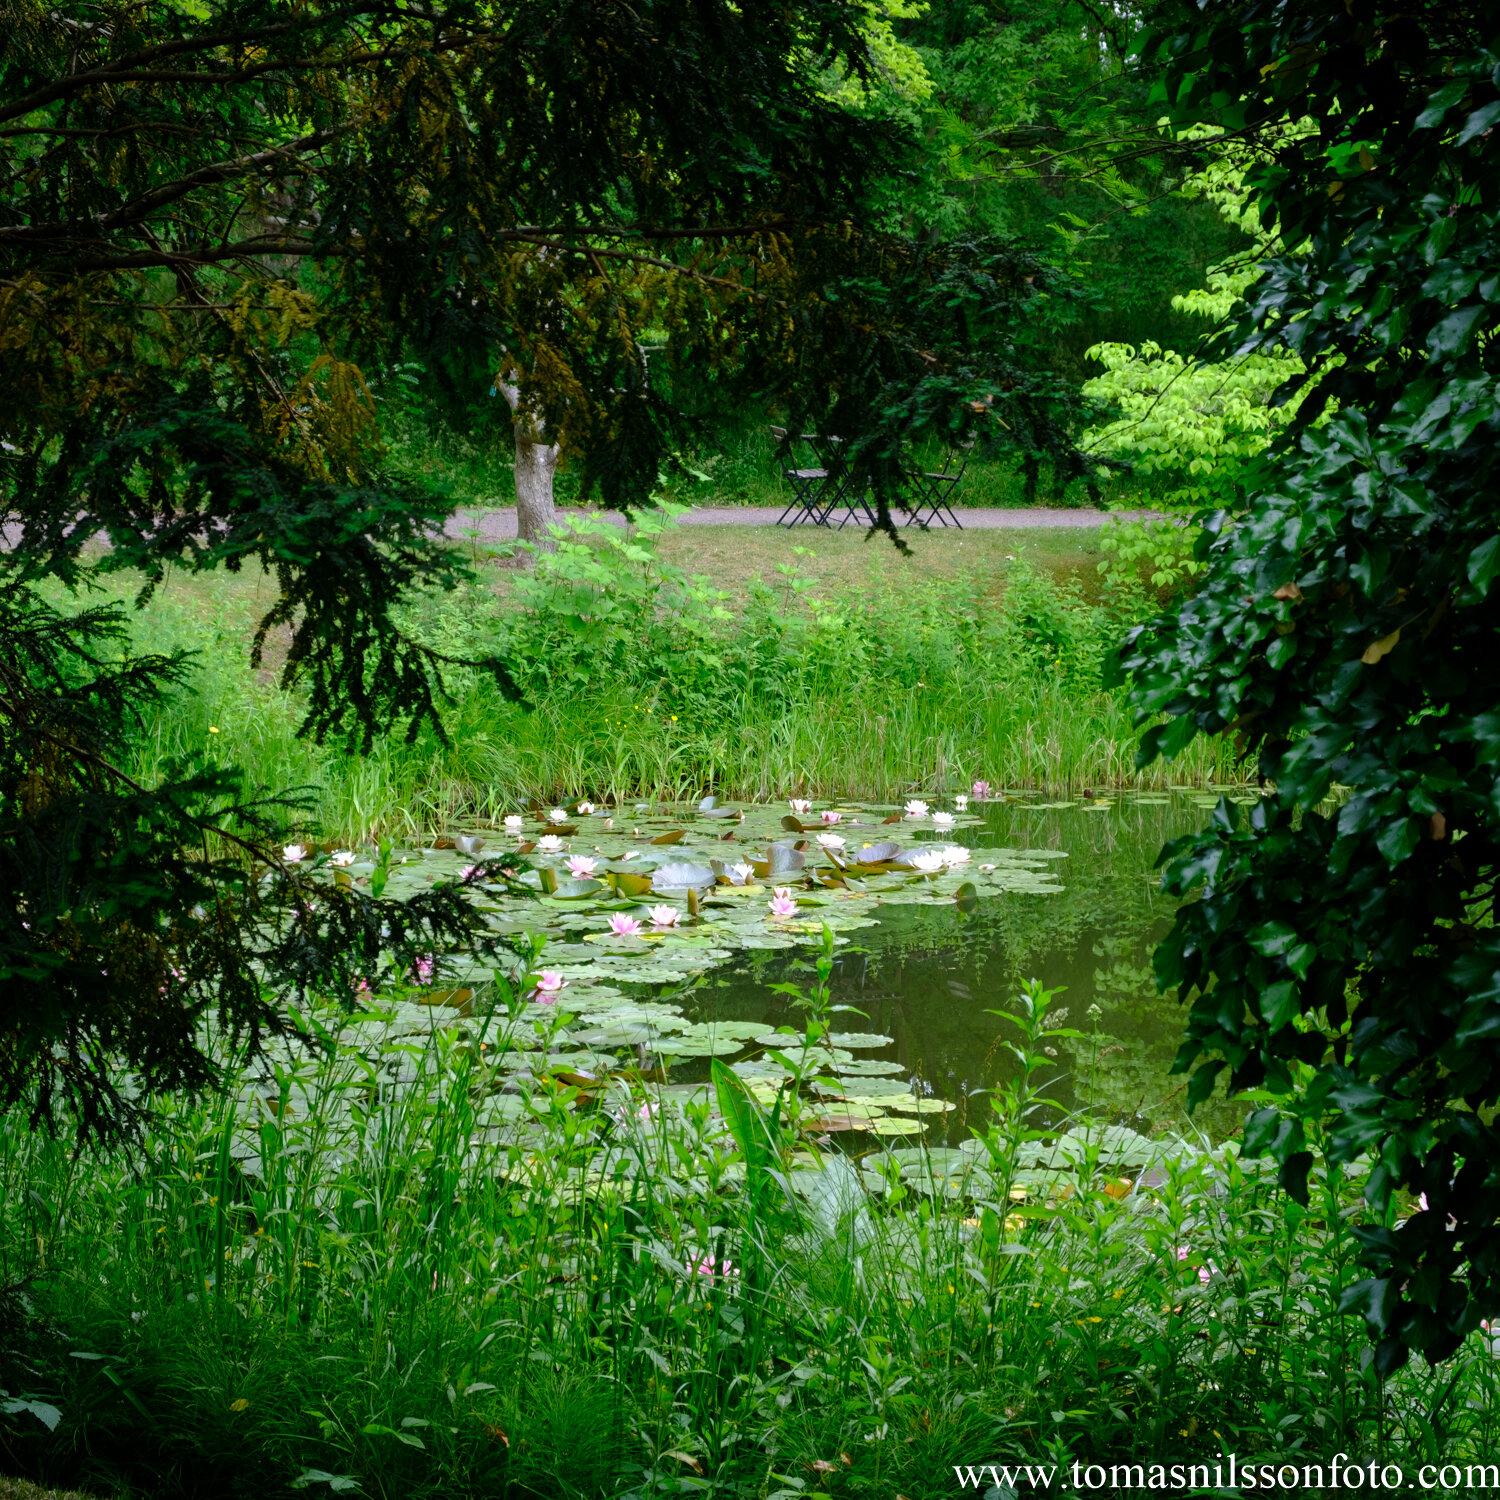 Day 189 - July 7: Water Lily Pond